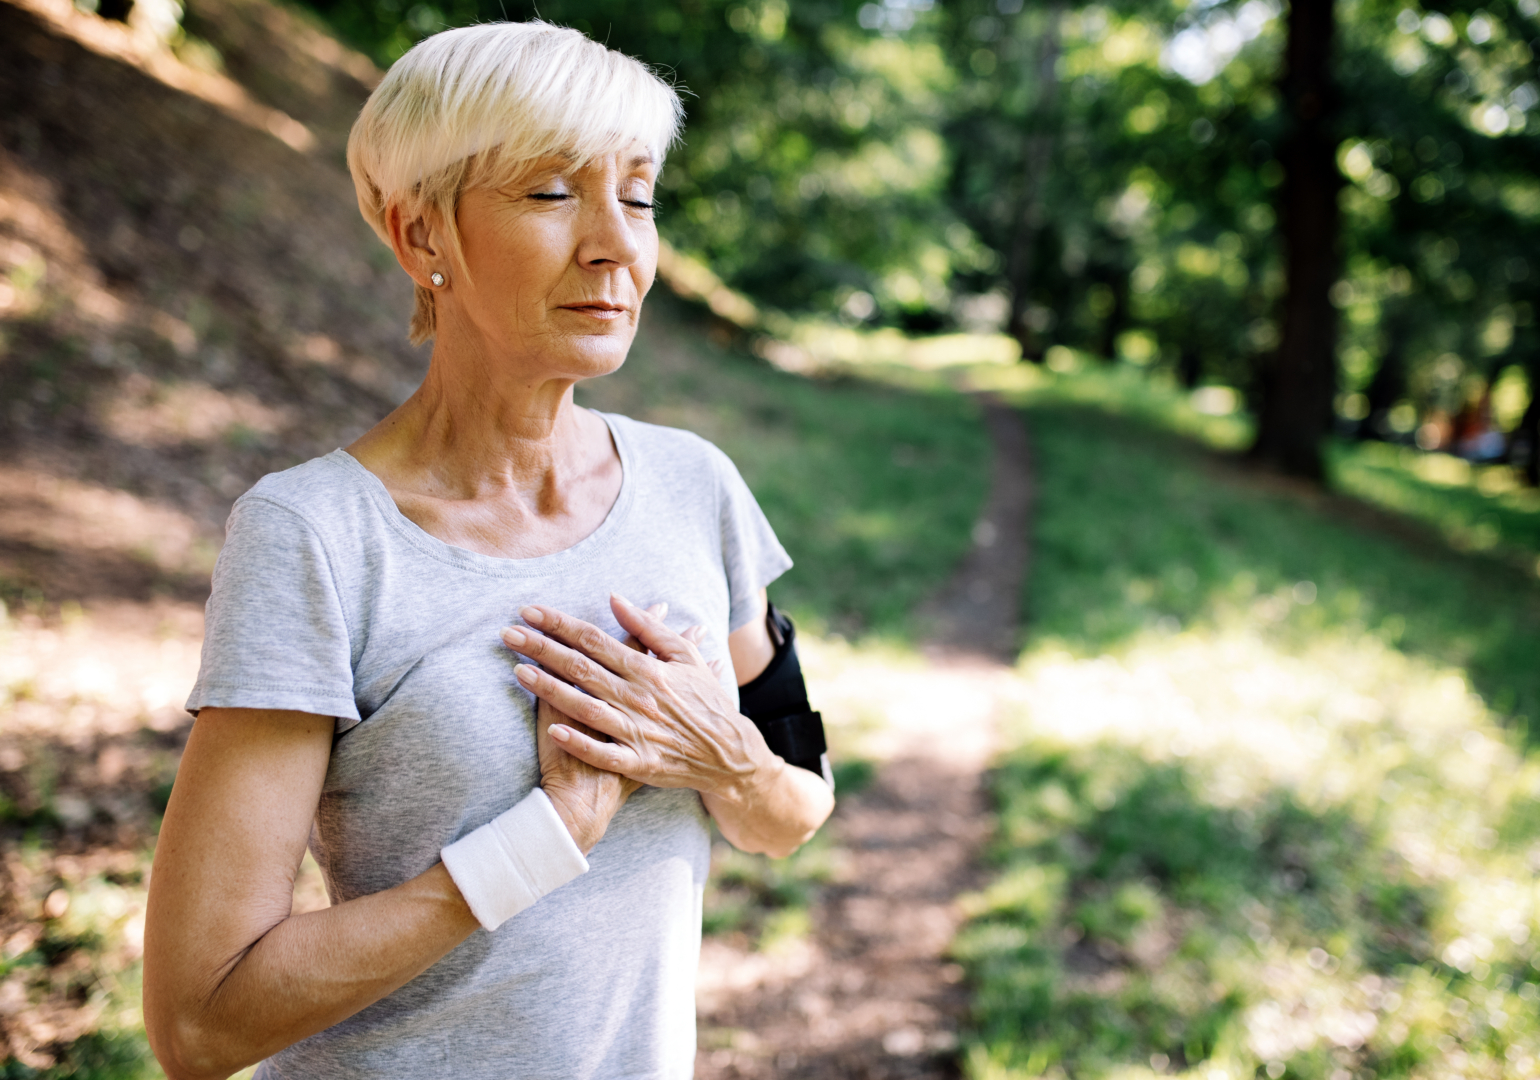 Woman with chest pain suffering from heart attack during running.